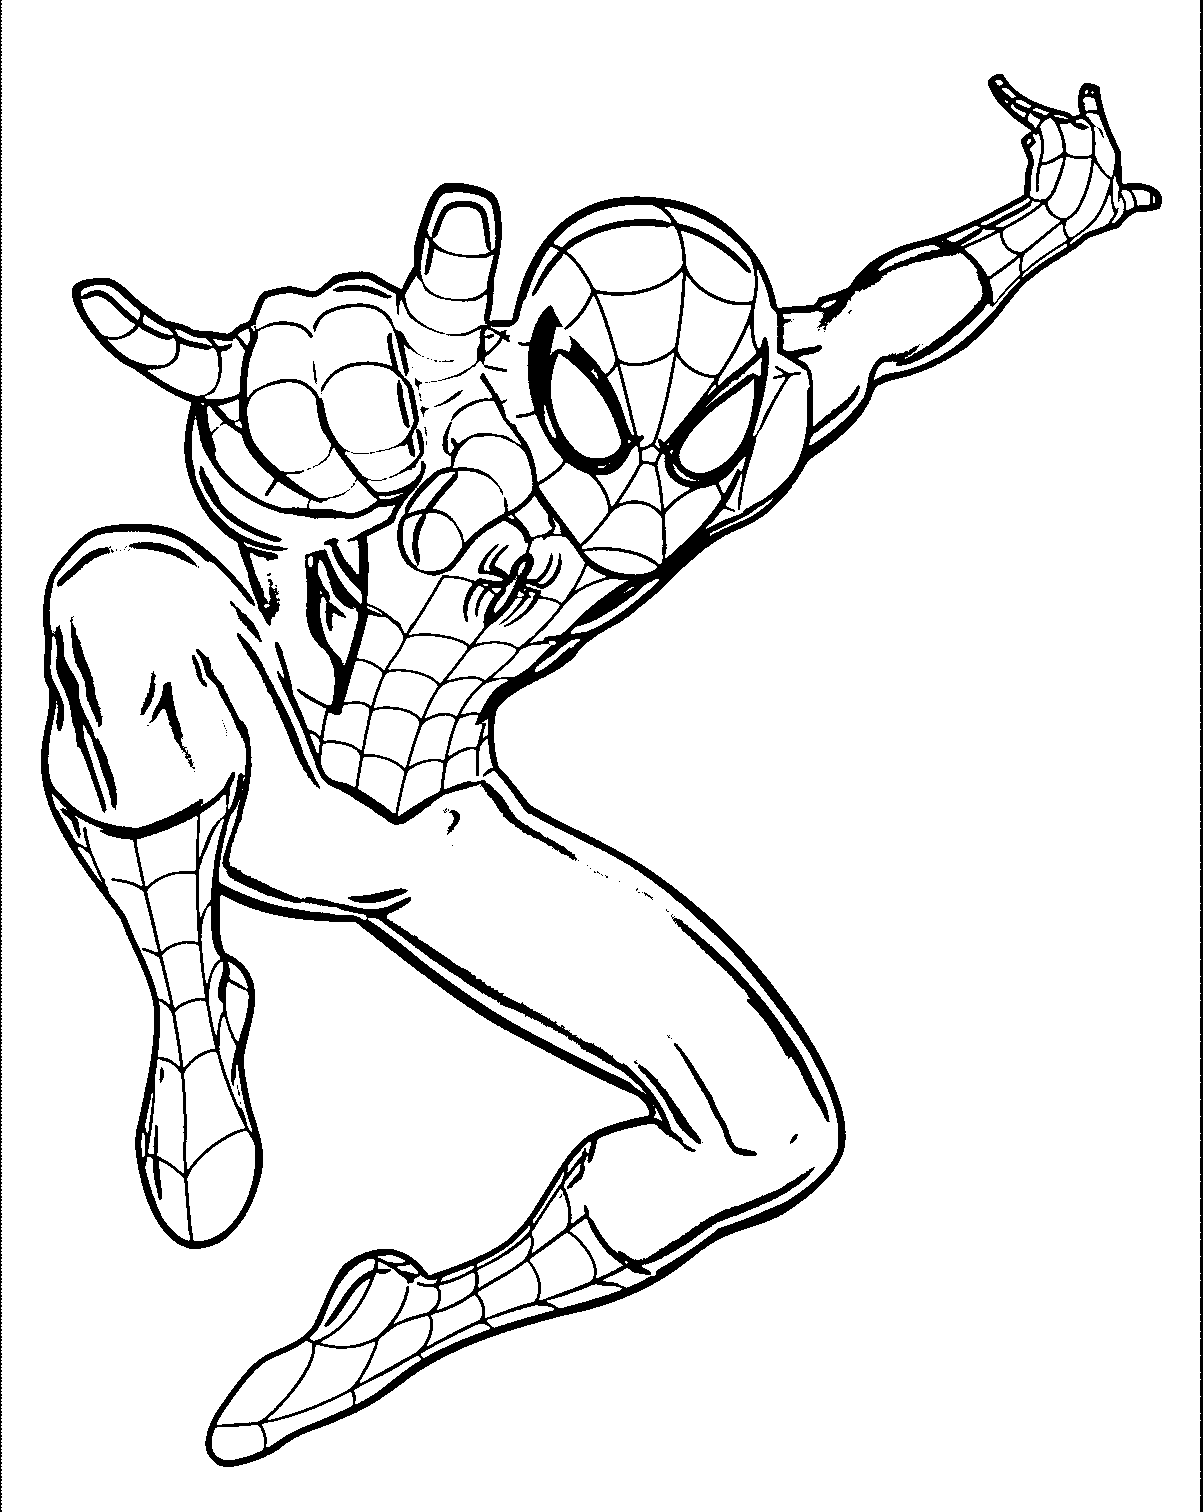 Ultimate Spider Man Giant Wall Decal Coloring Page | Wecoloringpage